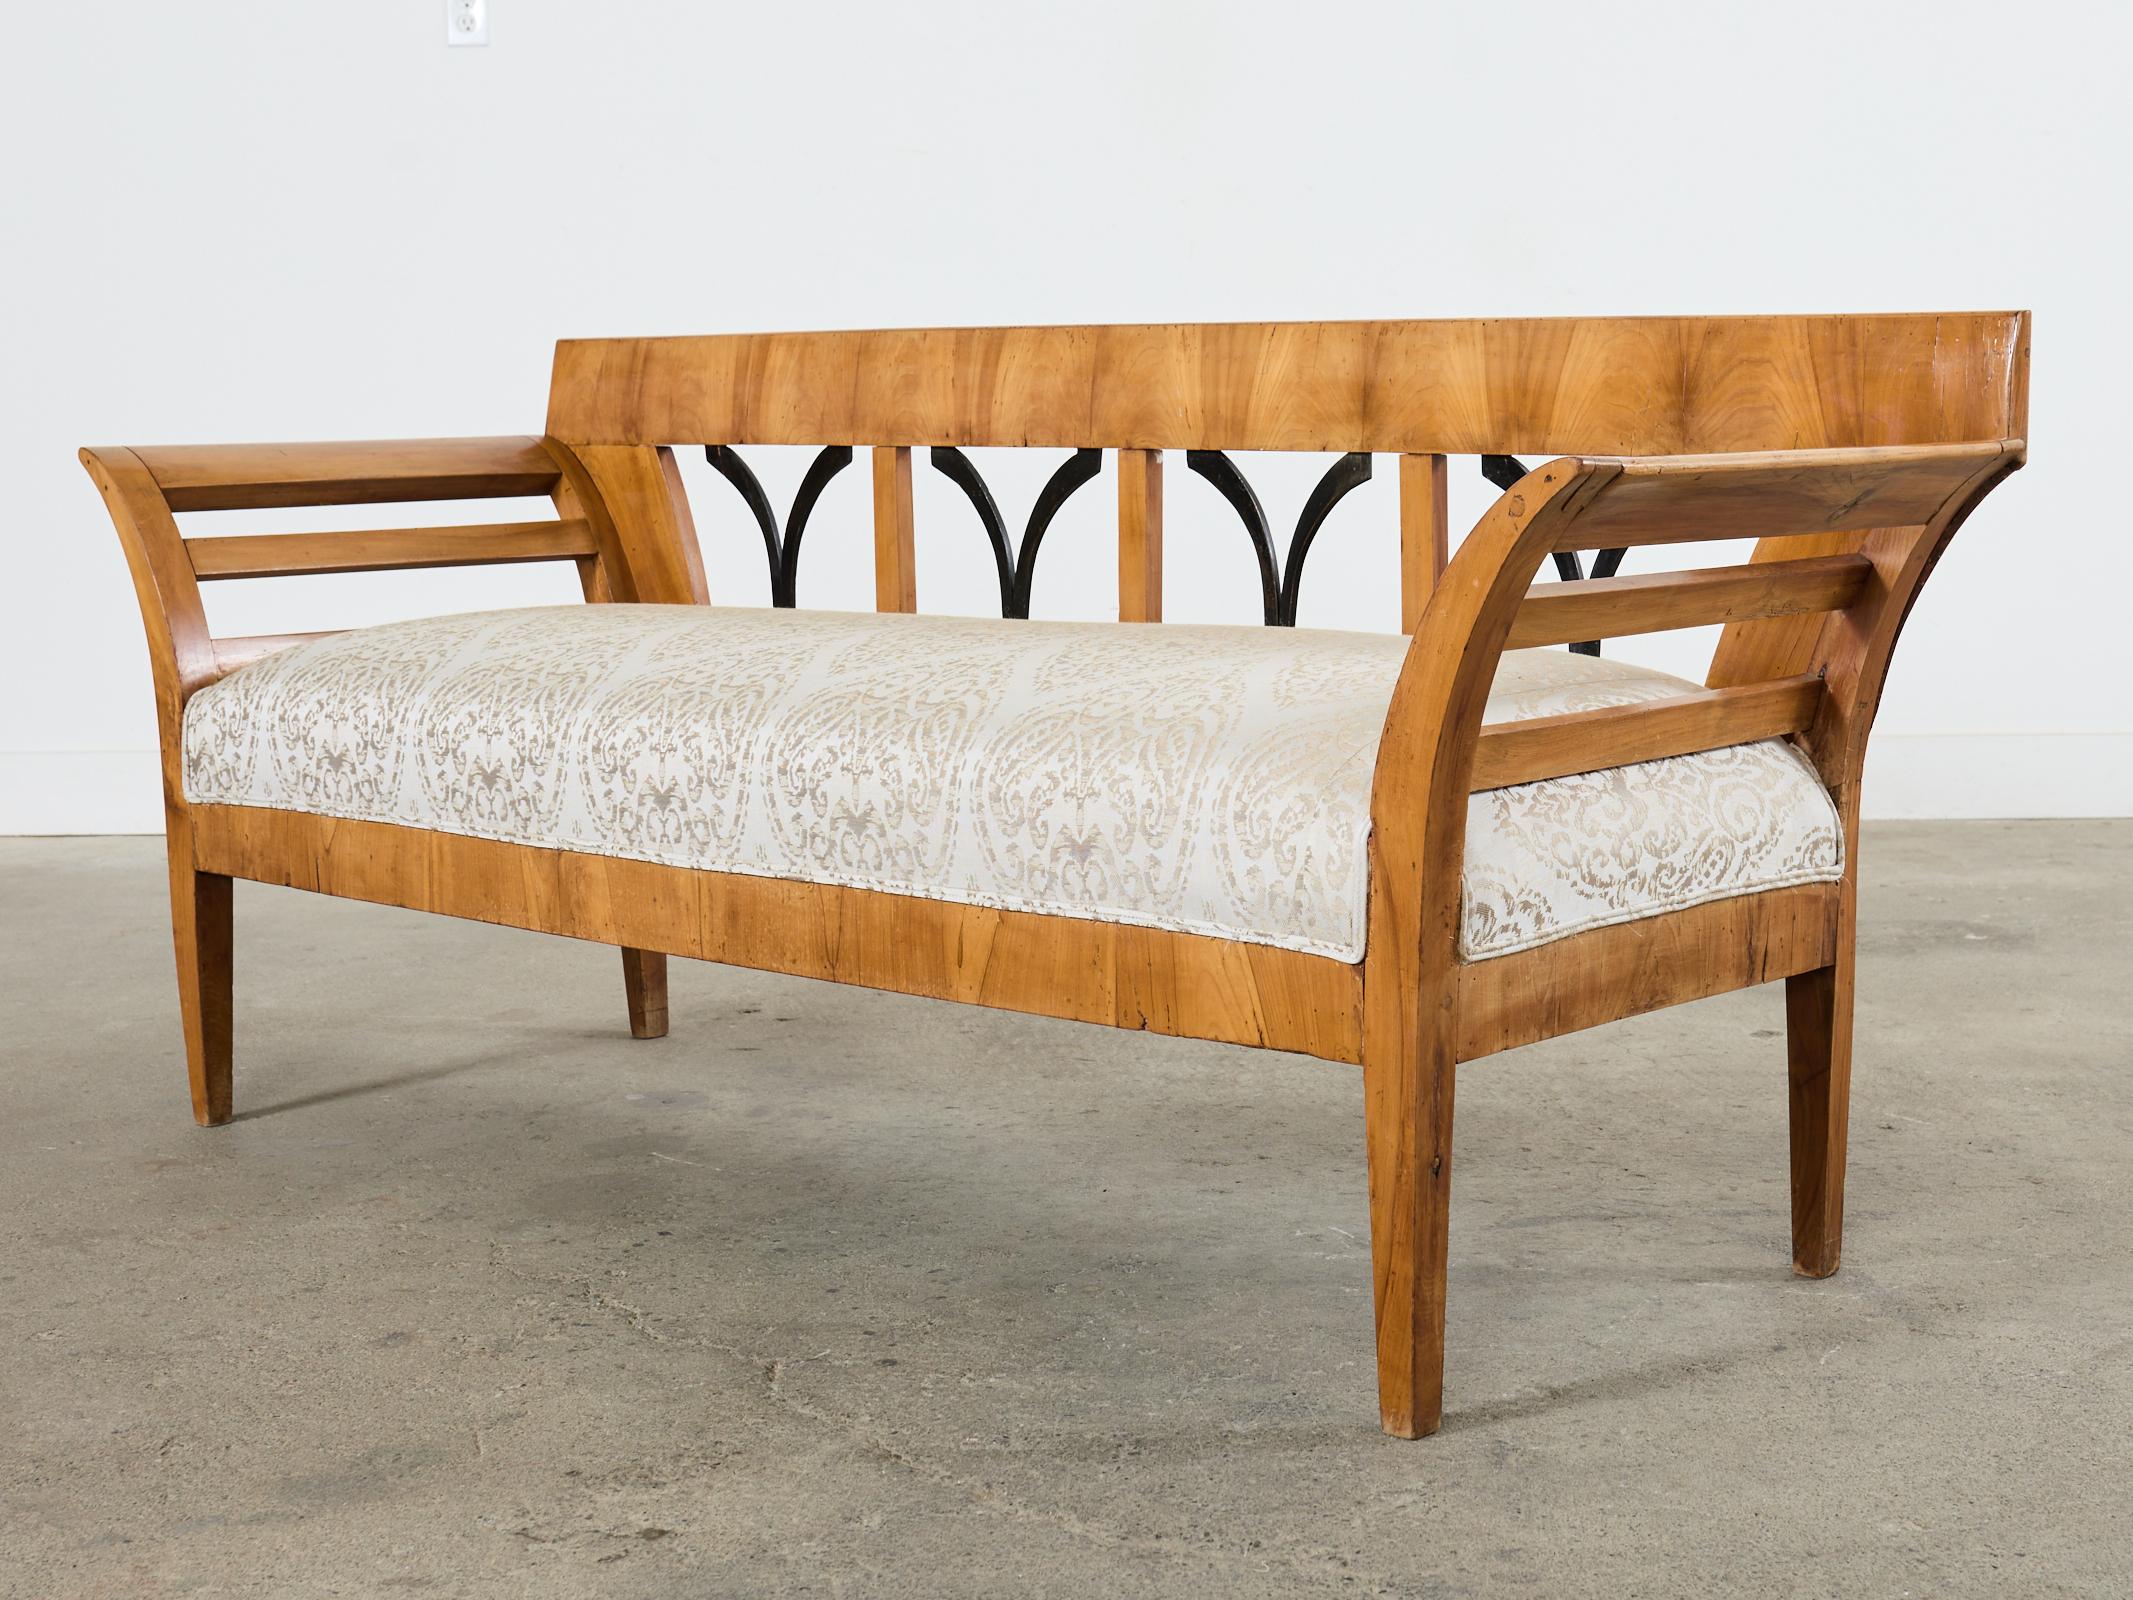 Hand-Crafted 19th Century Swedish Neoclassical Style Birch Veneer Bench Seat For Sale